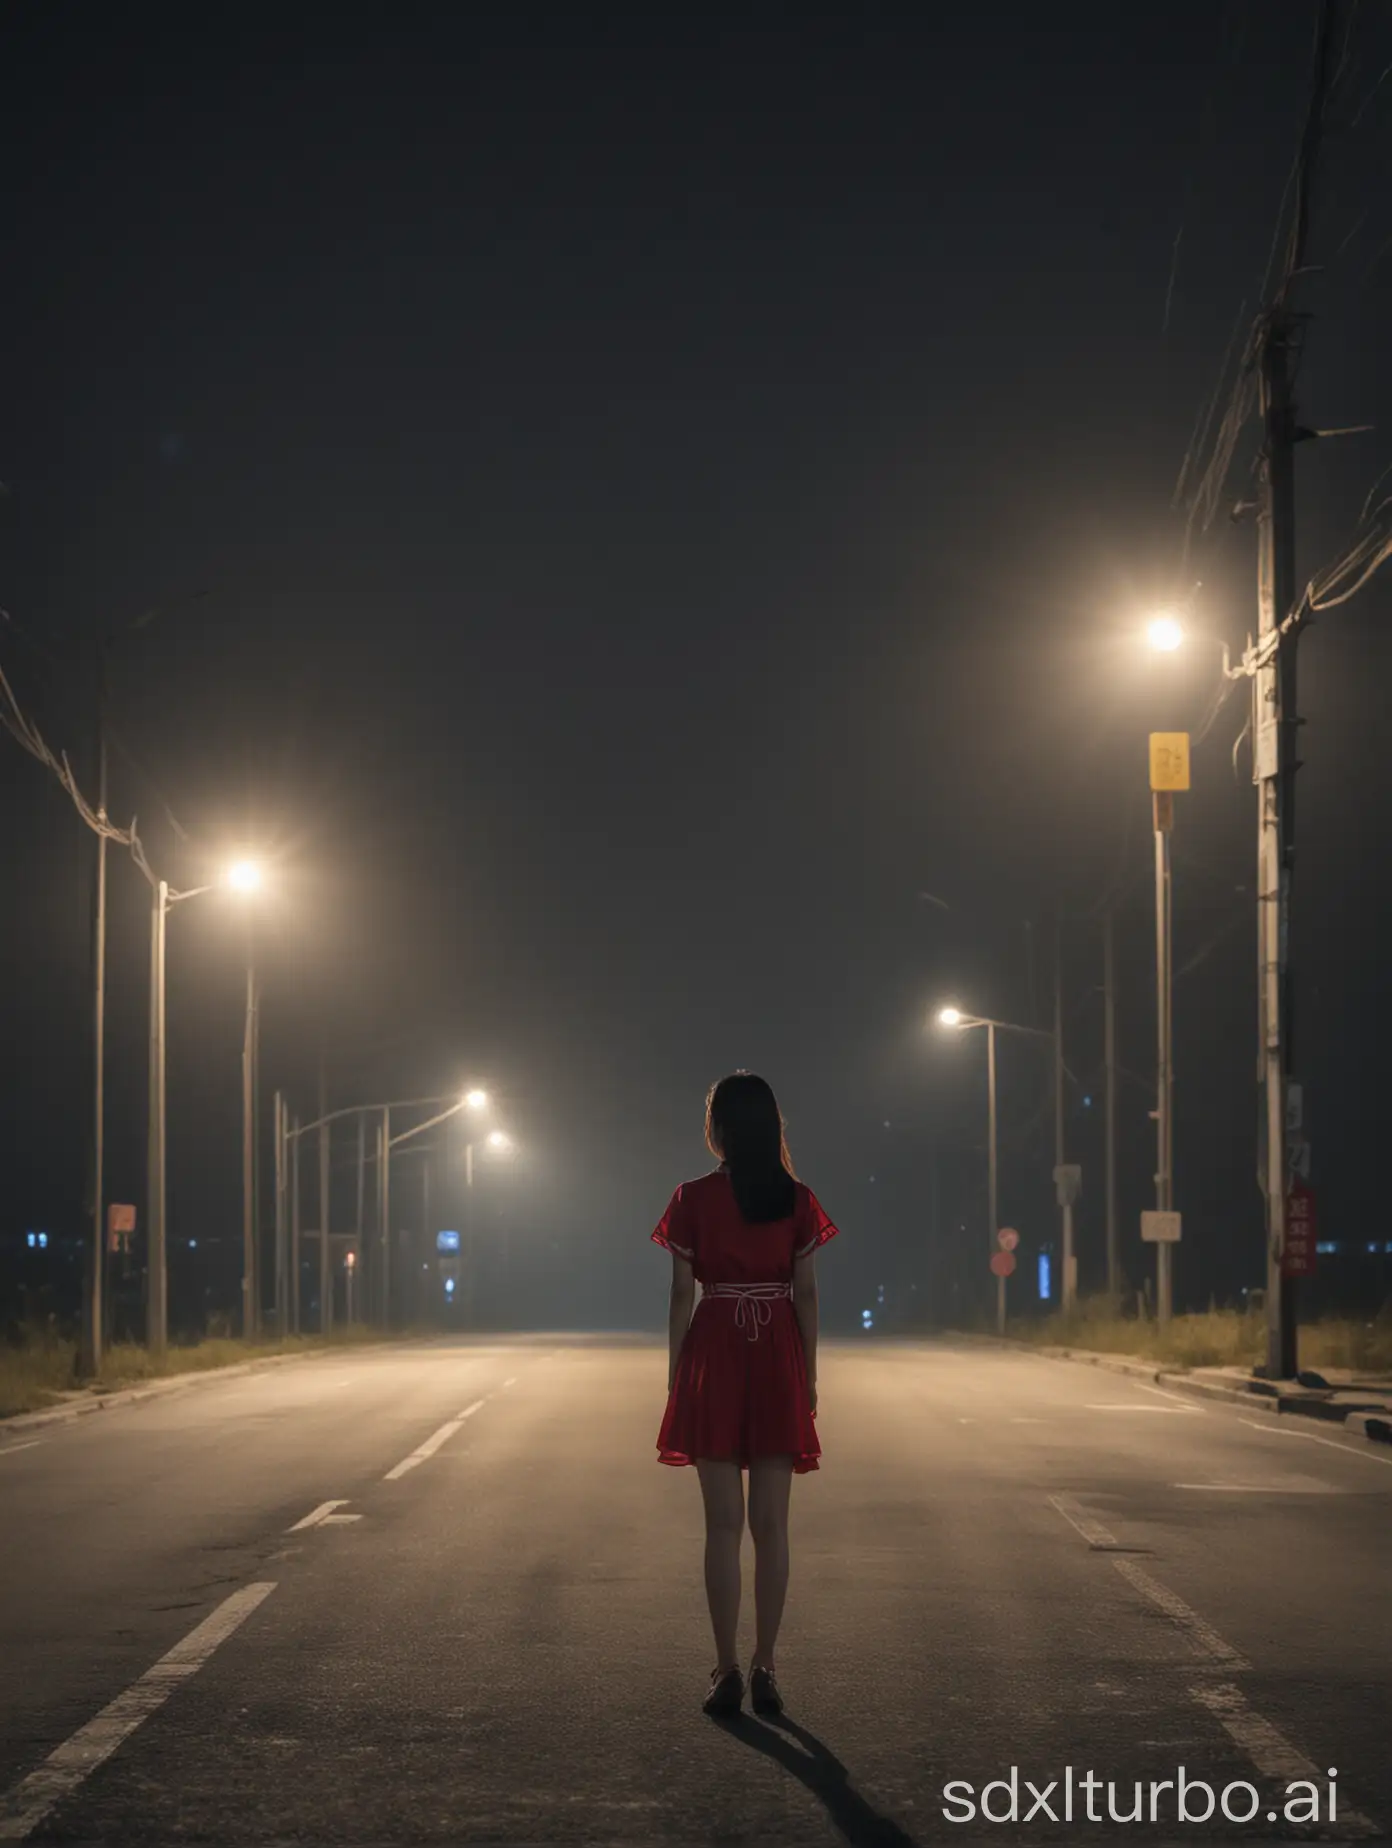 Night, a Chinese girl standing alone on the road's backdrop